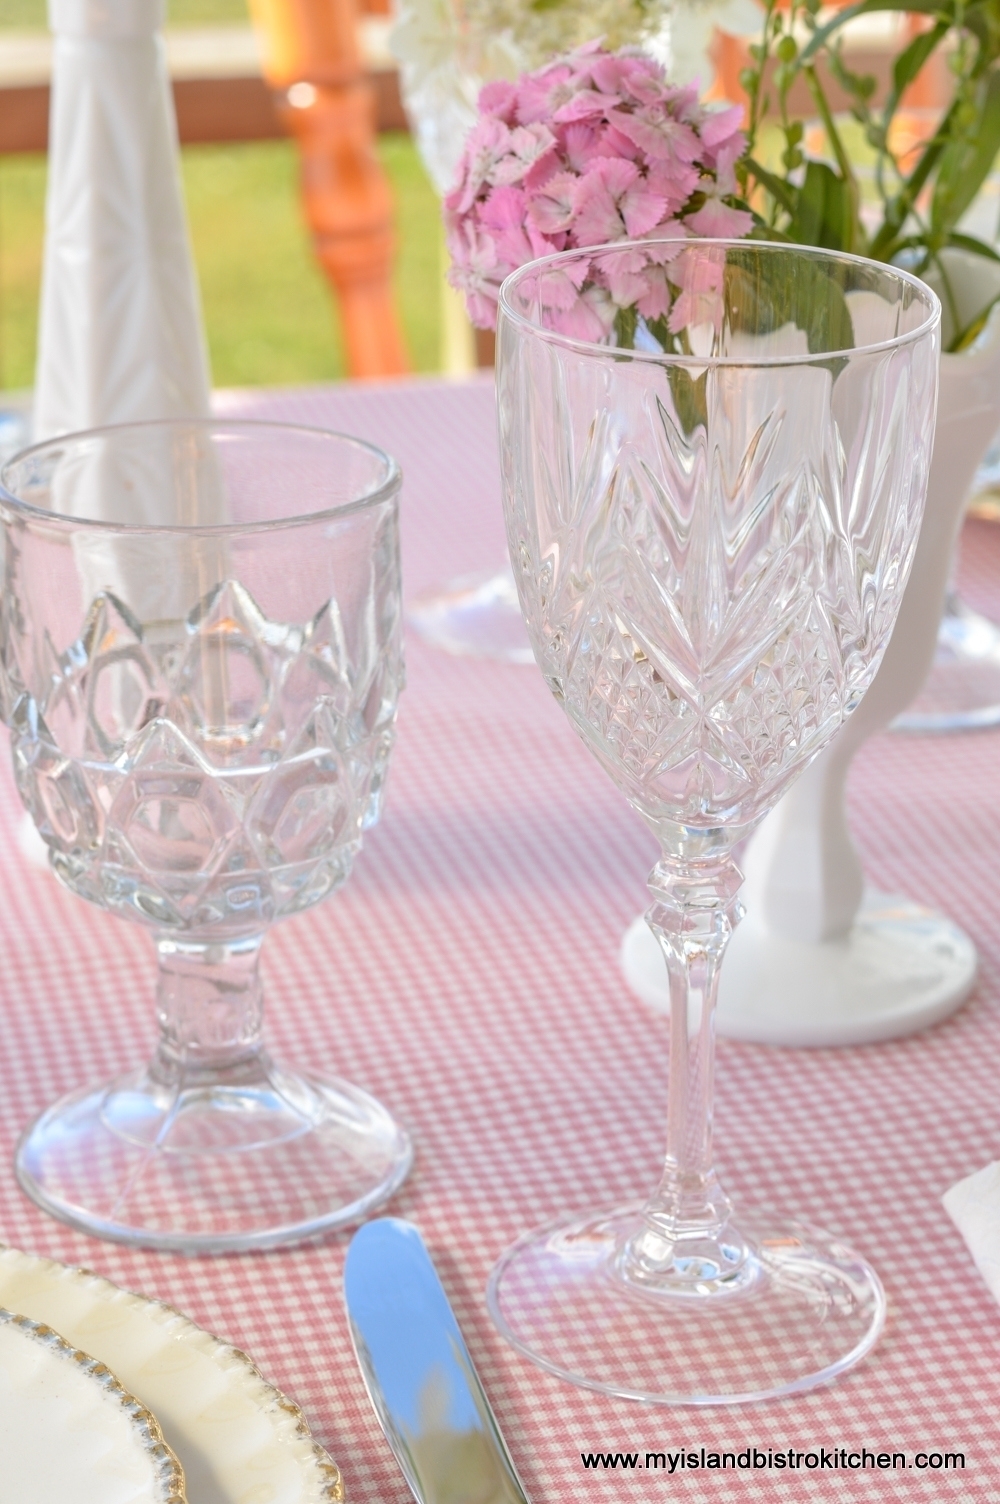 Mixed vintage glassware works in casual tablesettings